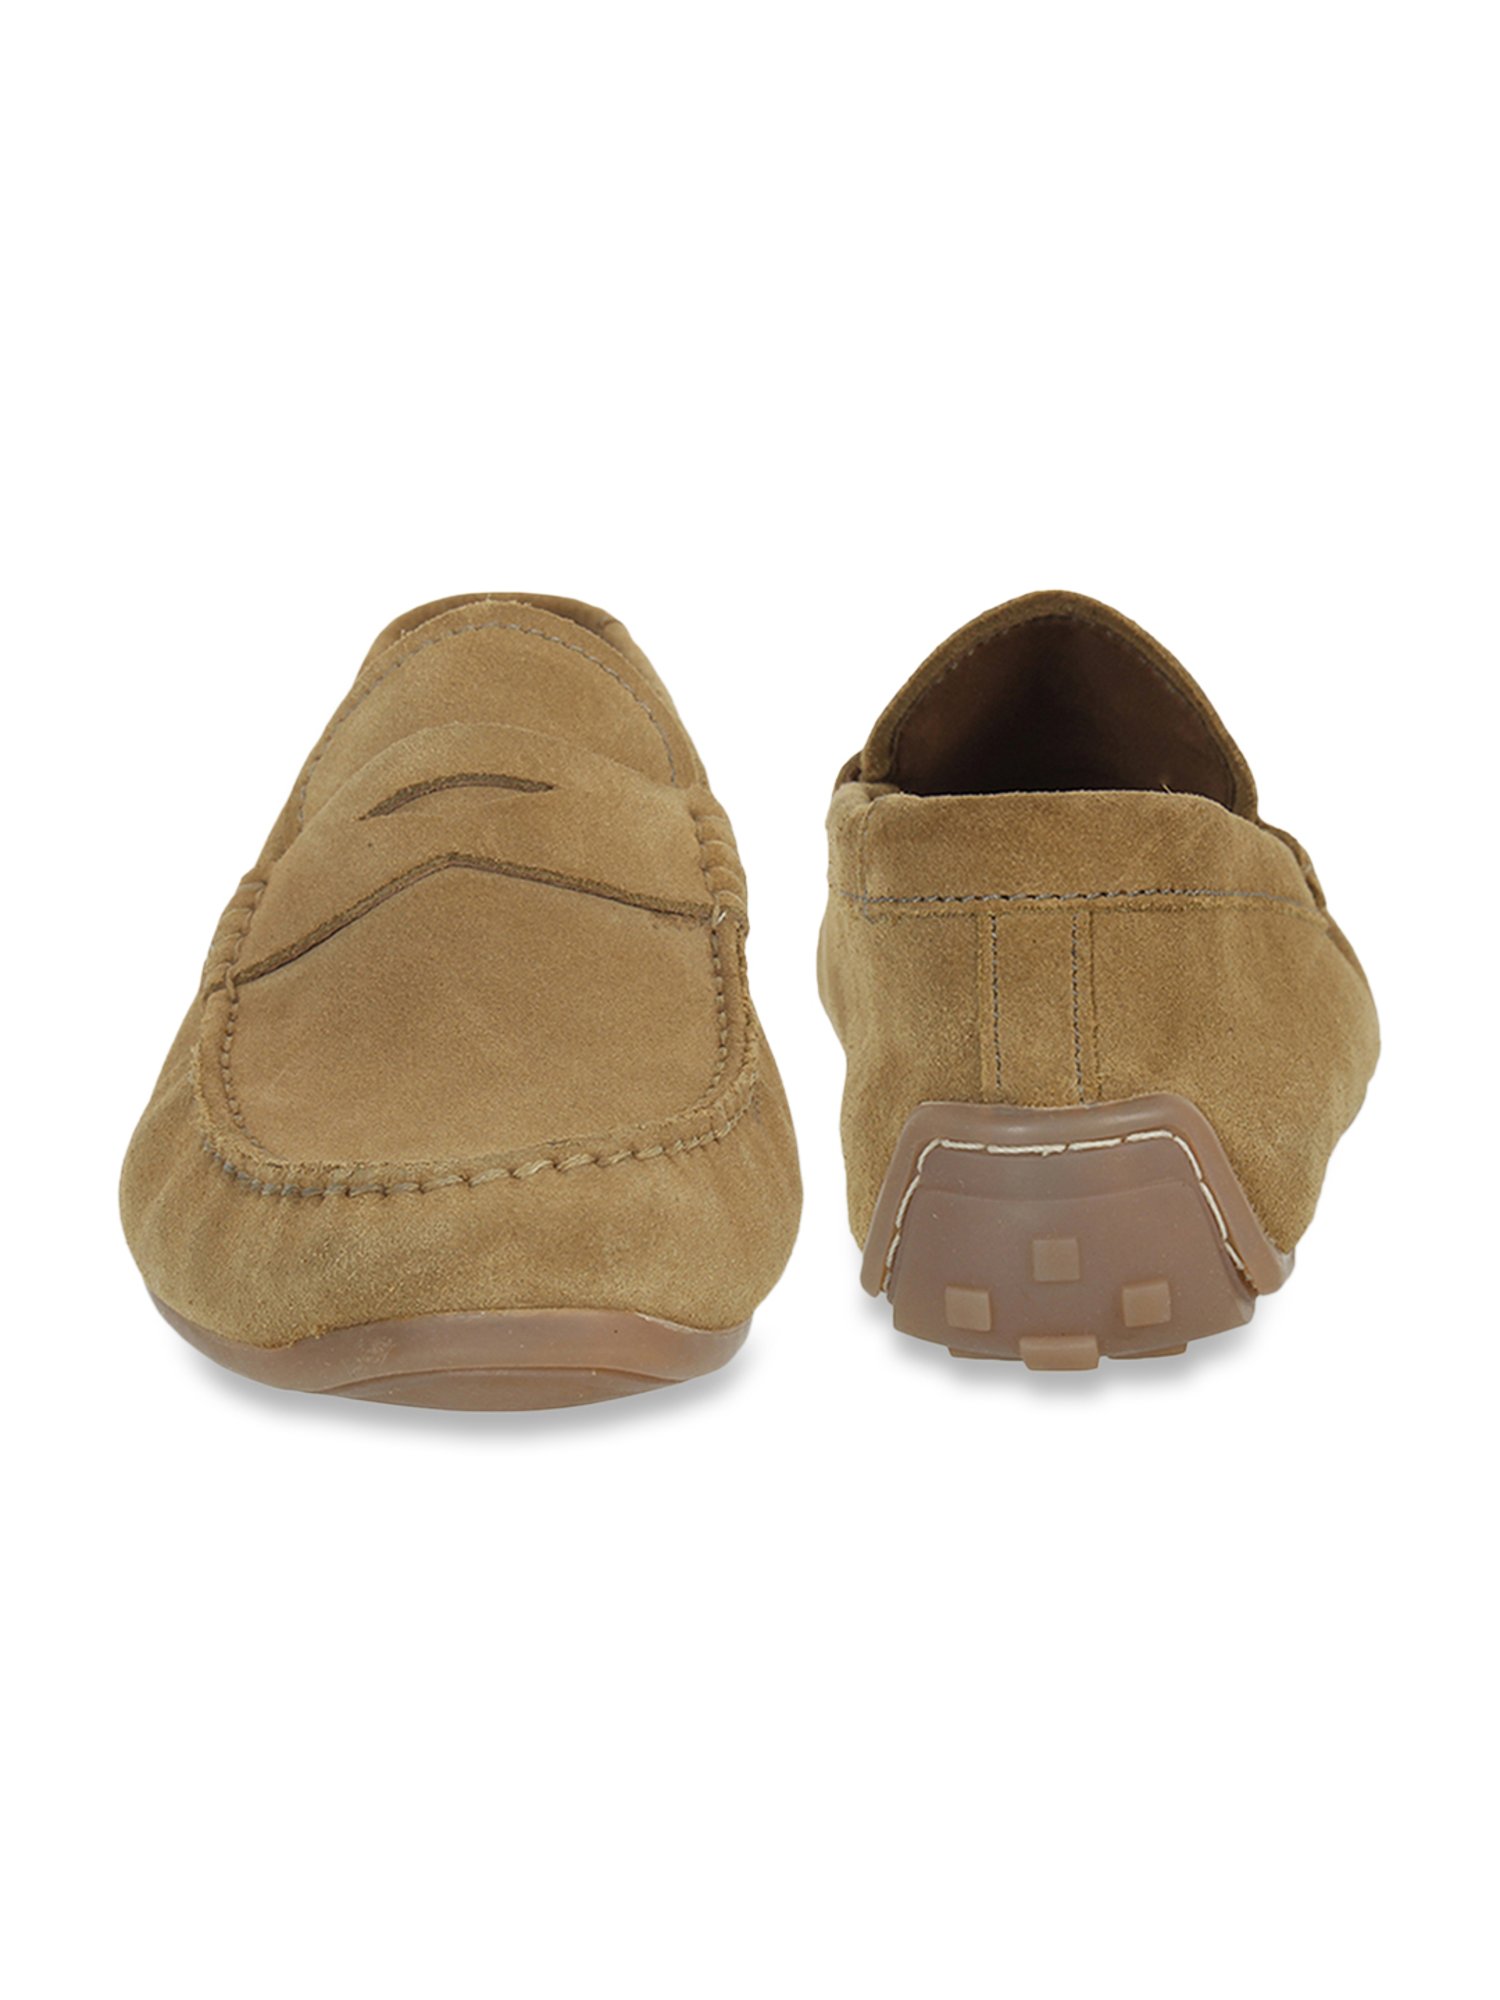 Clarks Reazor Penny Tan Loafers from 